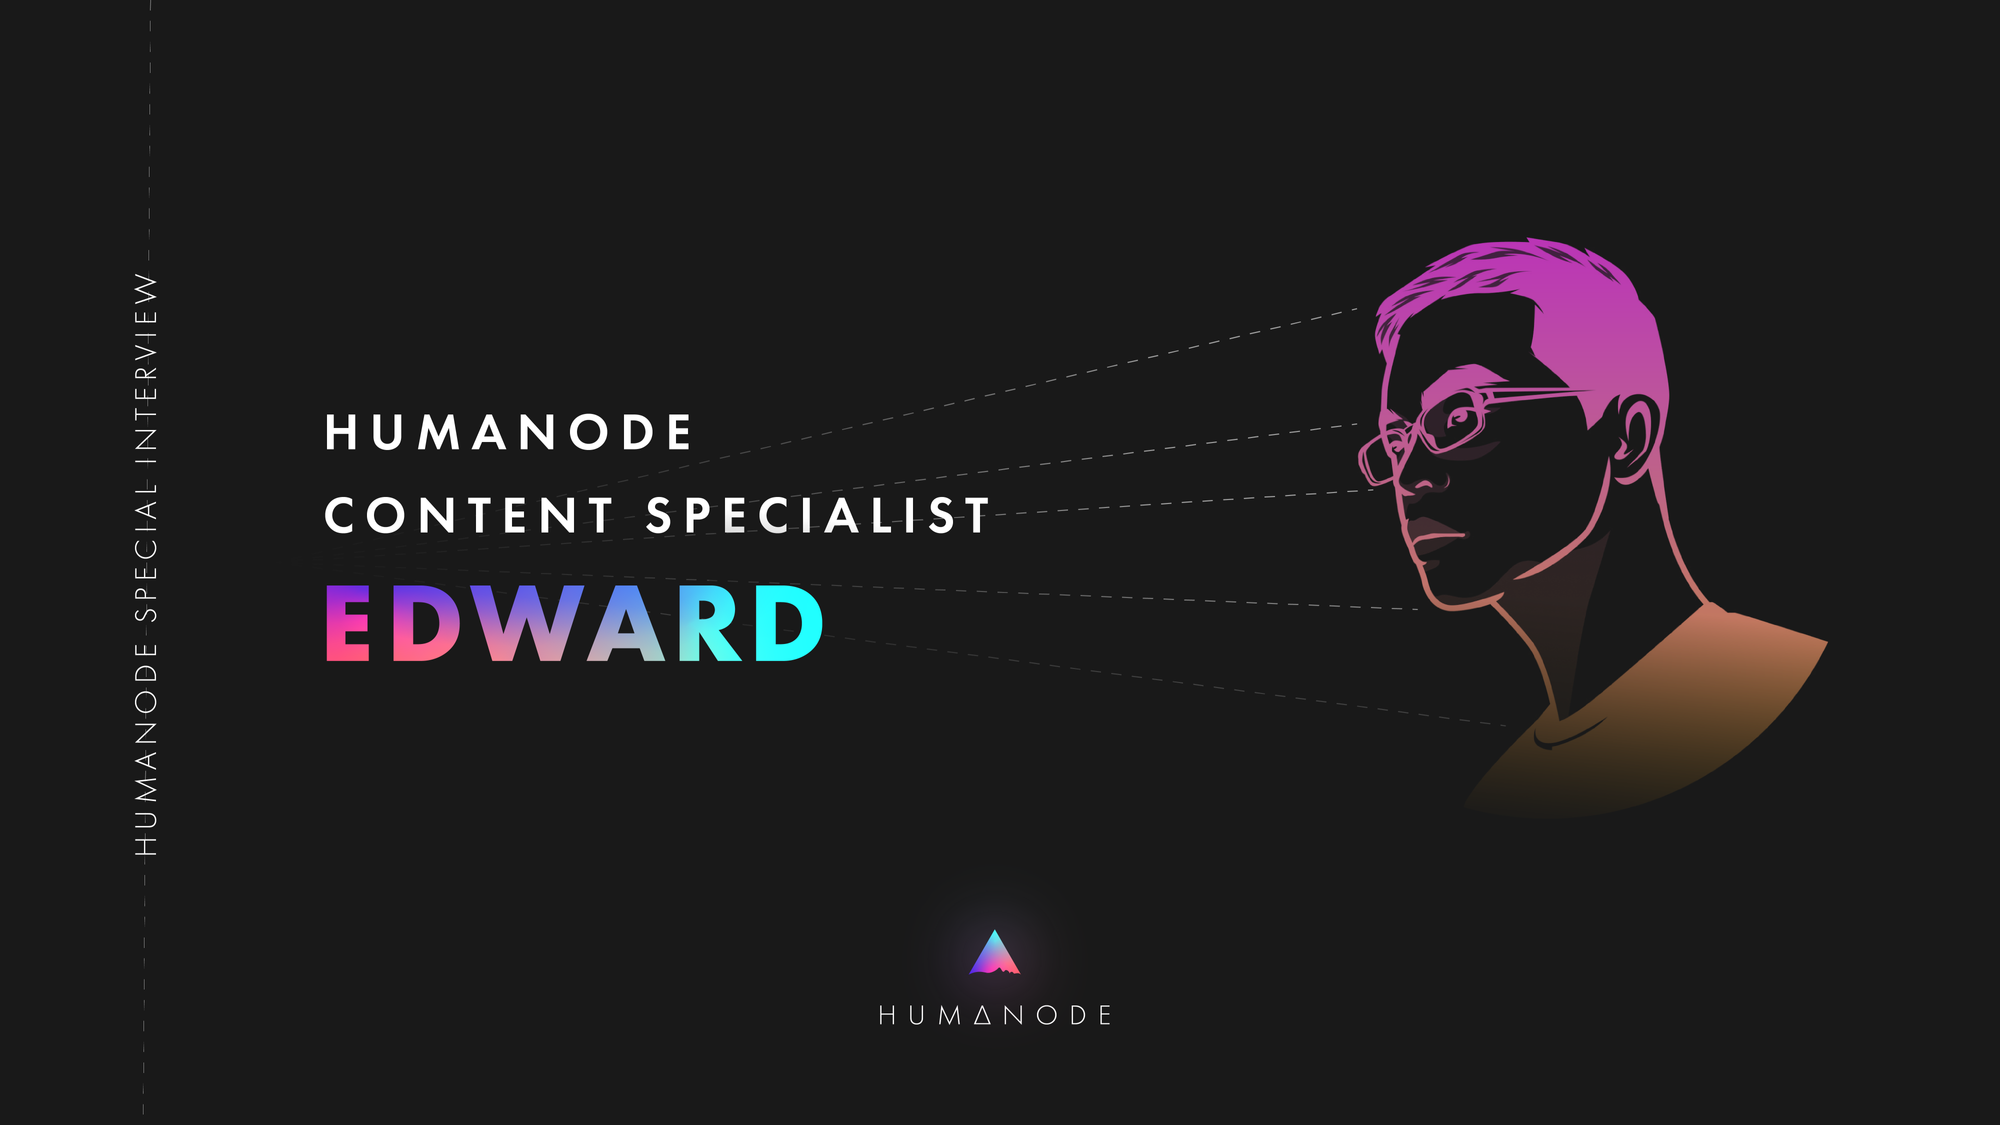 [Humanode Special Interview Series]: Edward, content specialist at Humanode